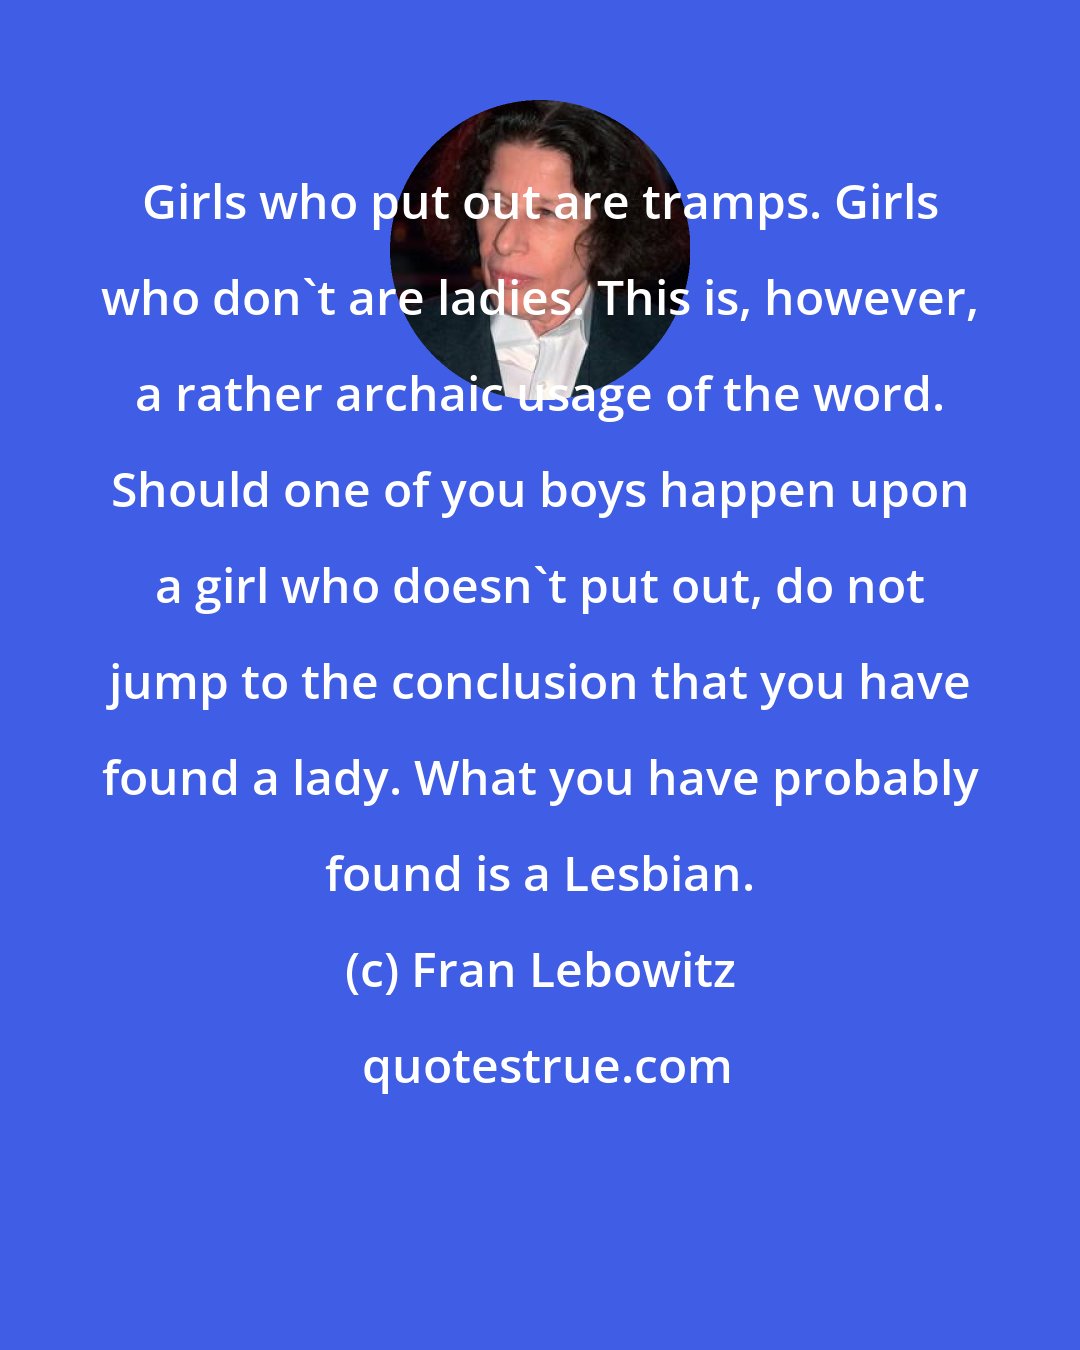 Fran Lebowitz: Girls who put out are tramps. Girls who don't are ladies. This is, however, a rather archaic usage of the word. Should one of you boys happen upon a girl who doesn't put out, do not jump to the conclusion that you have found a lady. What you have probably found is a Lesbian.